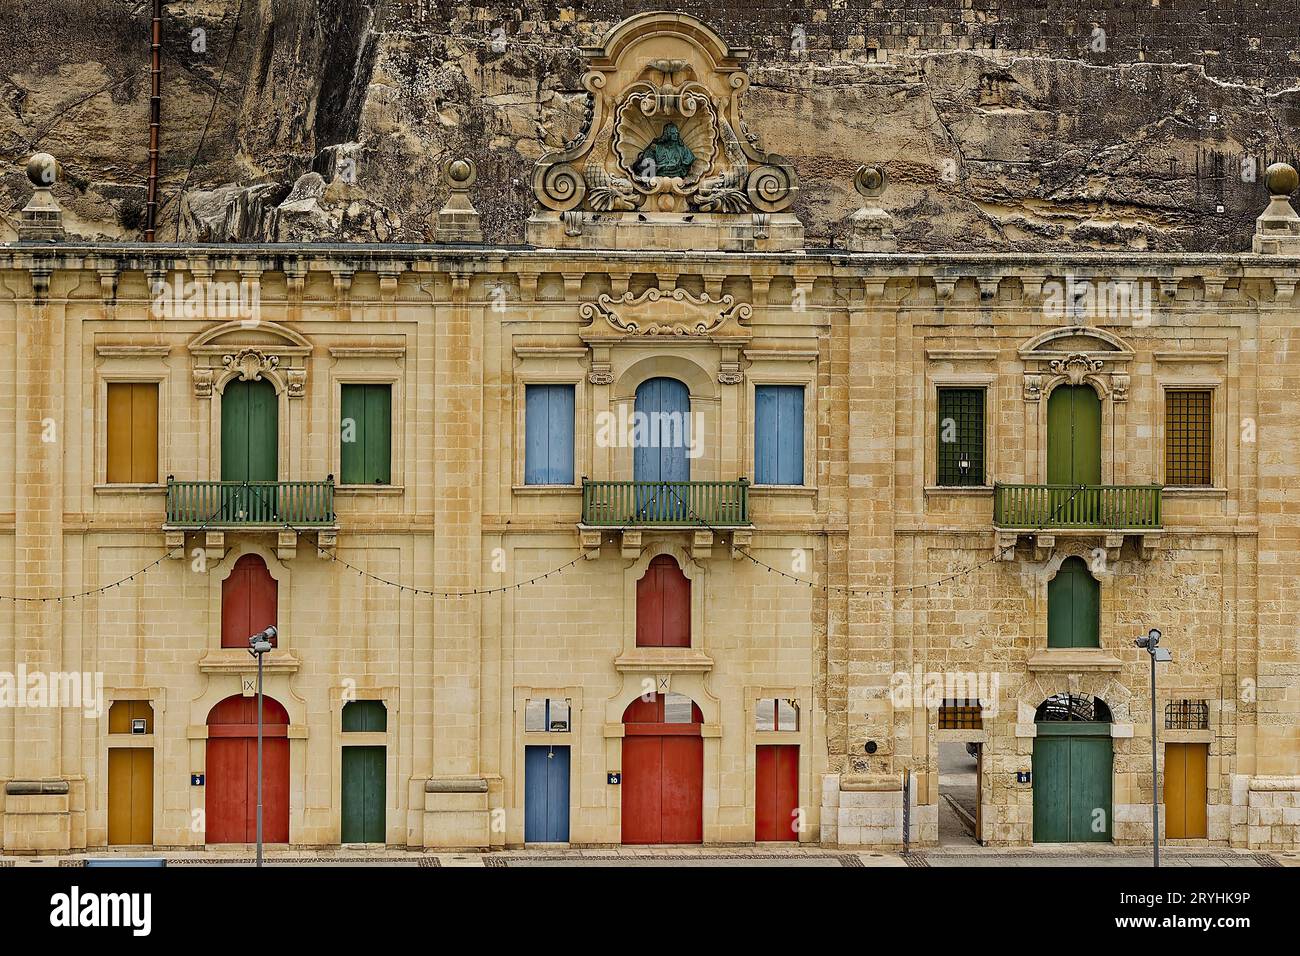 The colourful doors and windows of Valetta, Malta buy the harbour Stock Photo